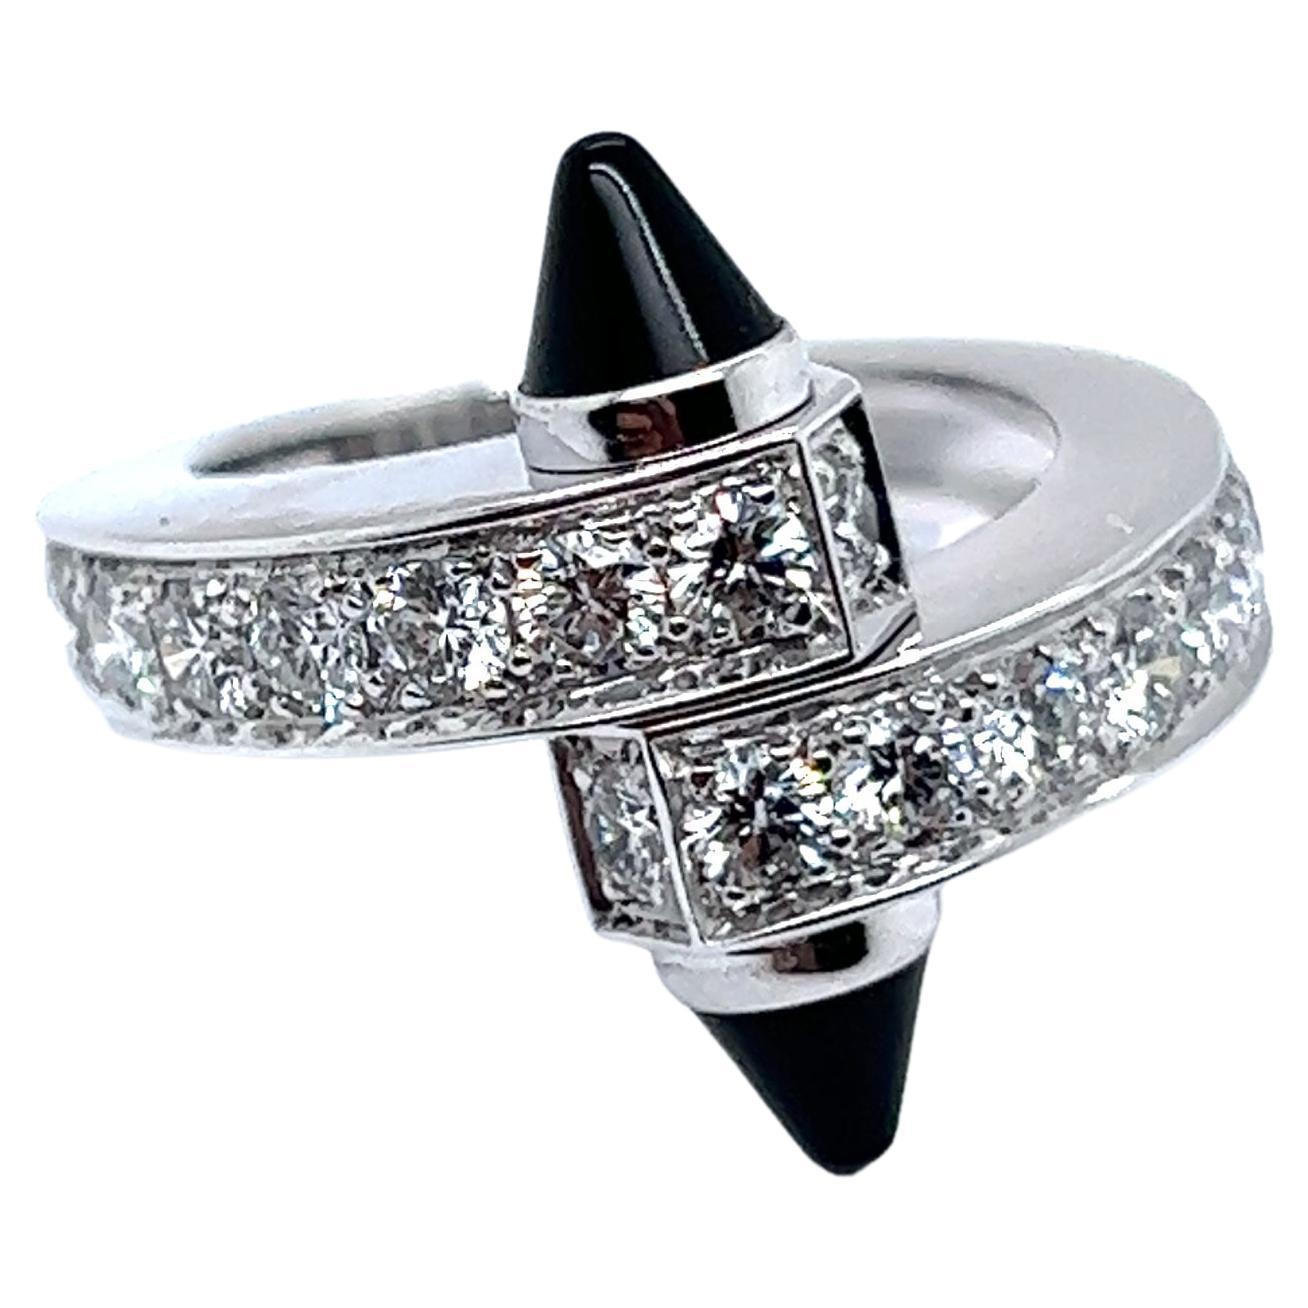 Cartier Menotte Ring with Diamonds and Onyx in 18 Karat White Gold 